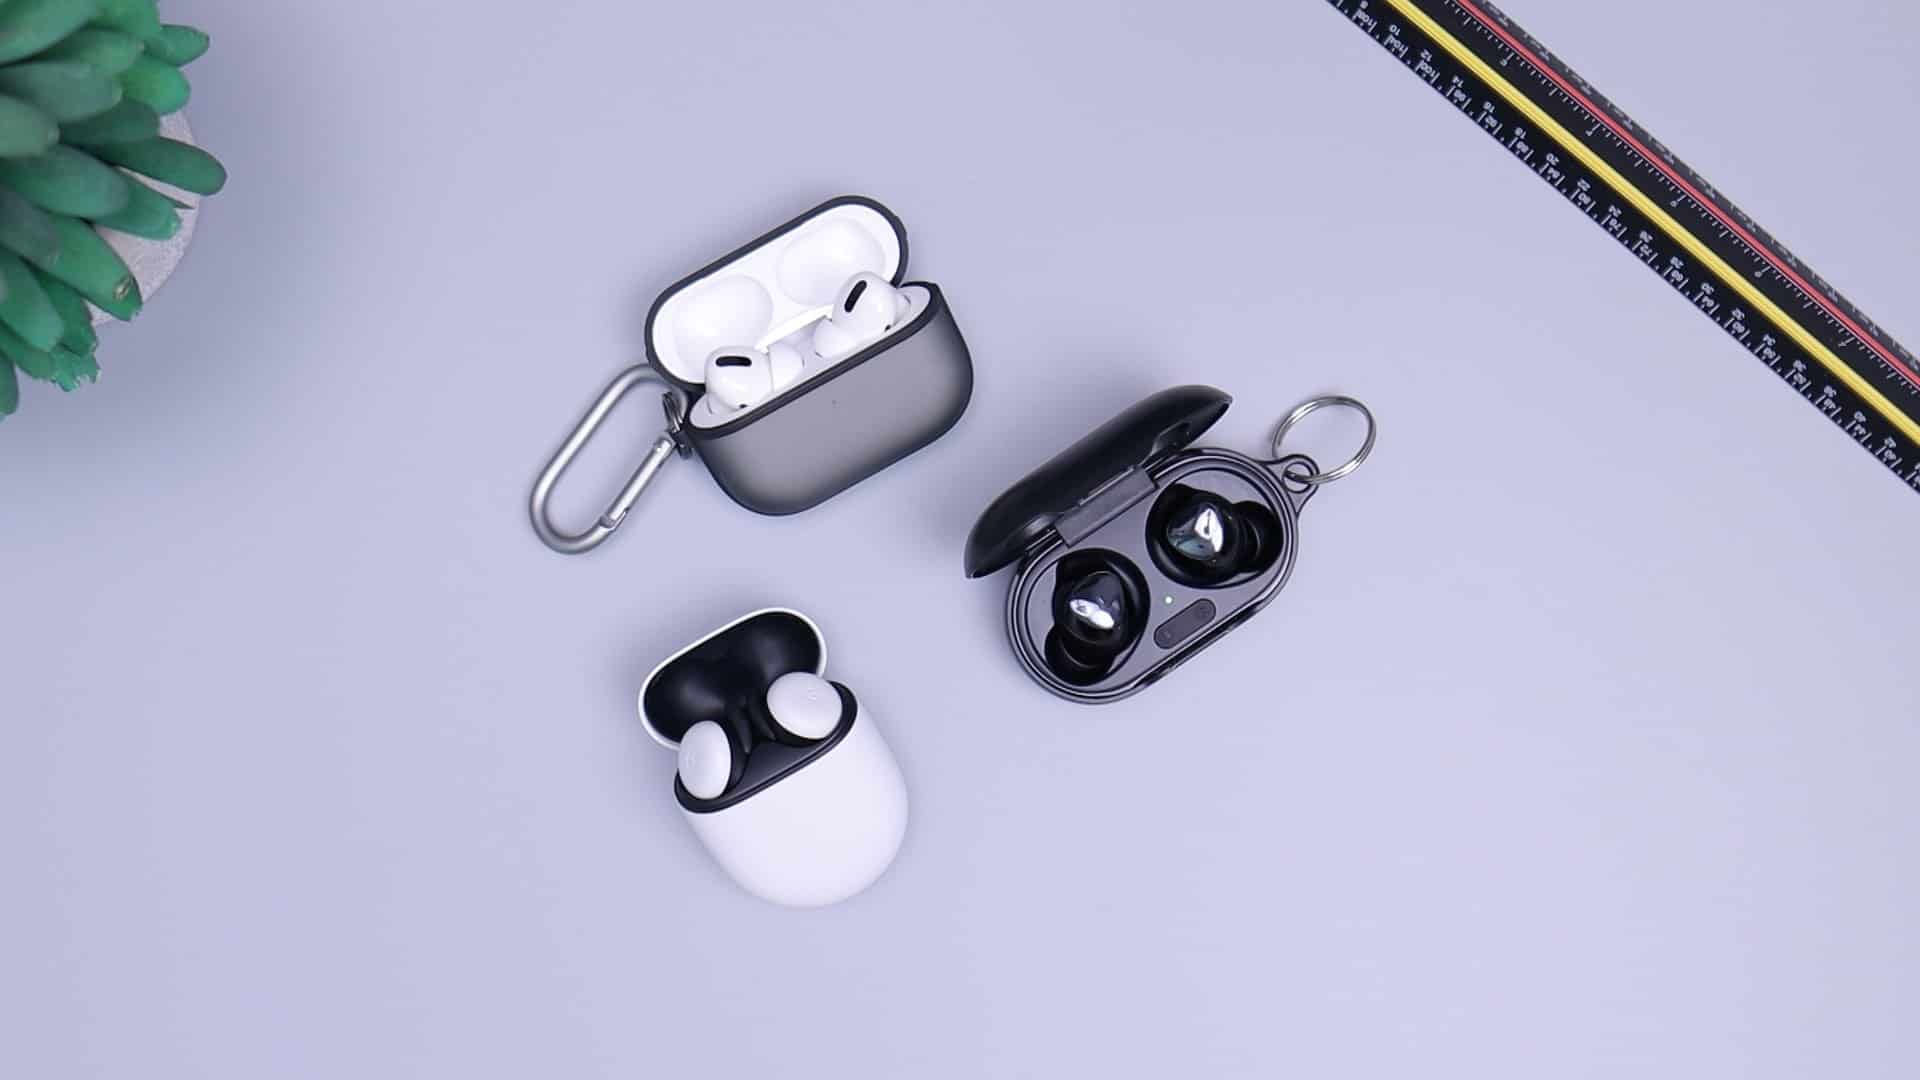 Three wireless earbuds and their cases